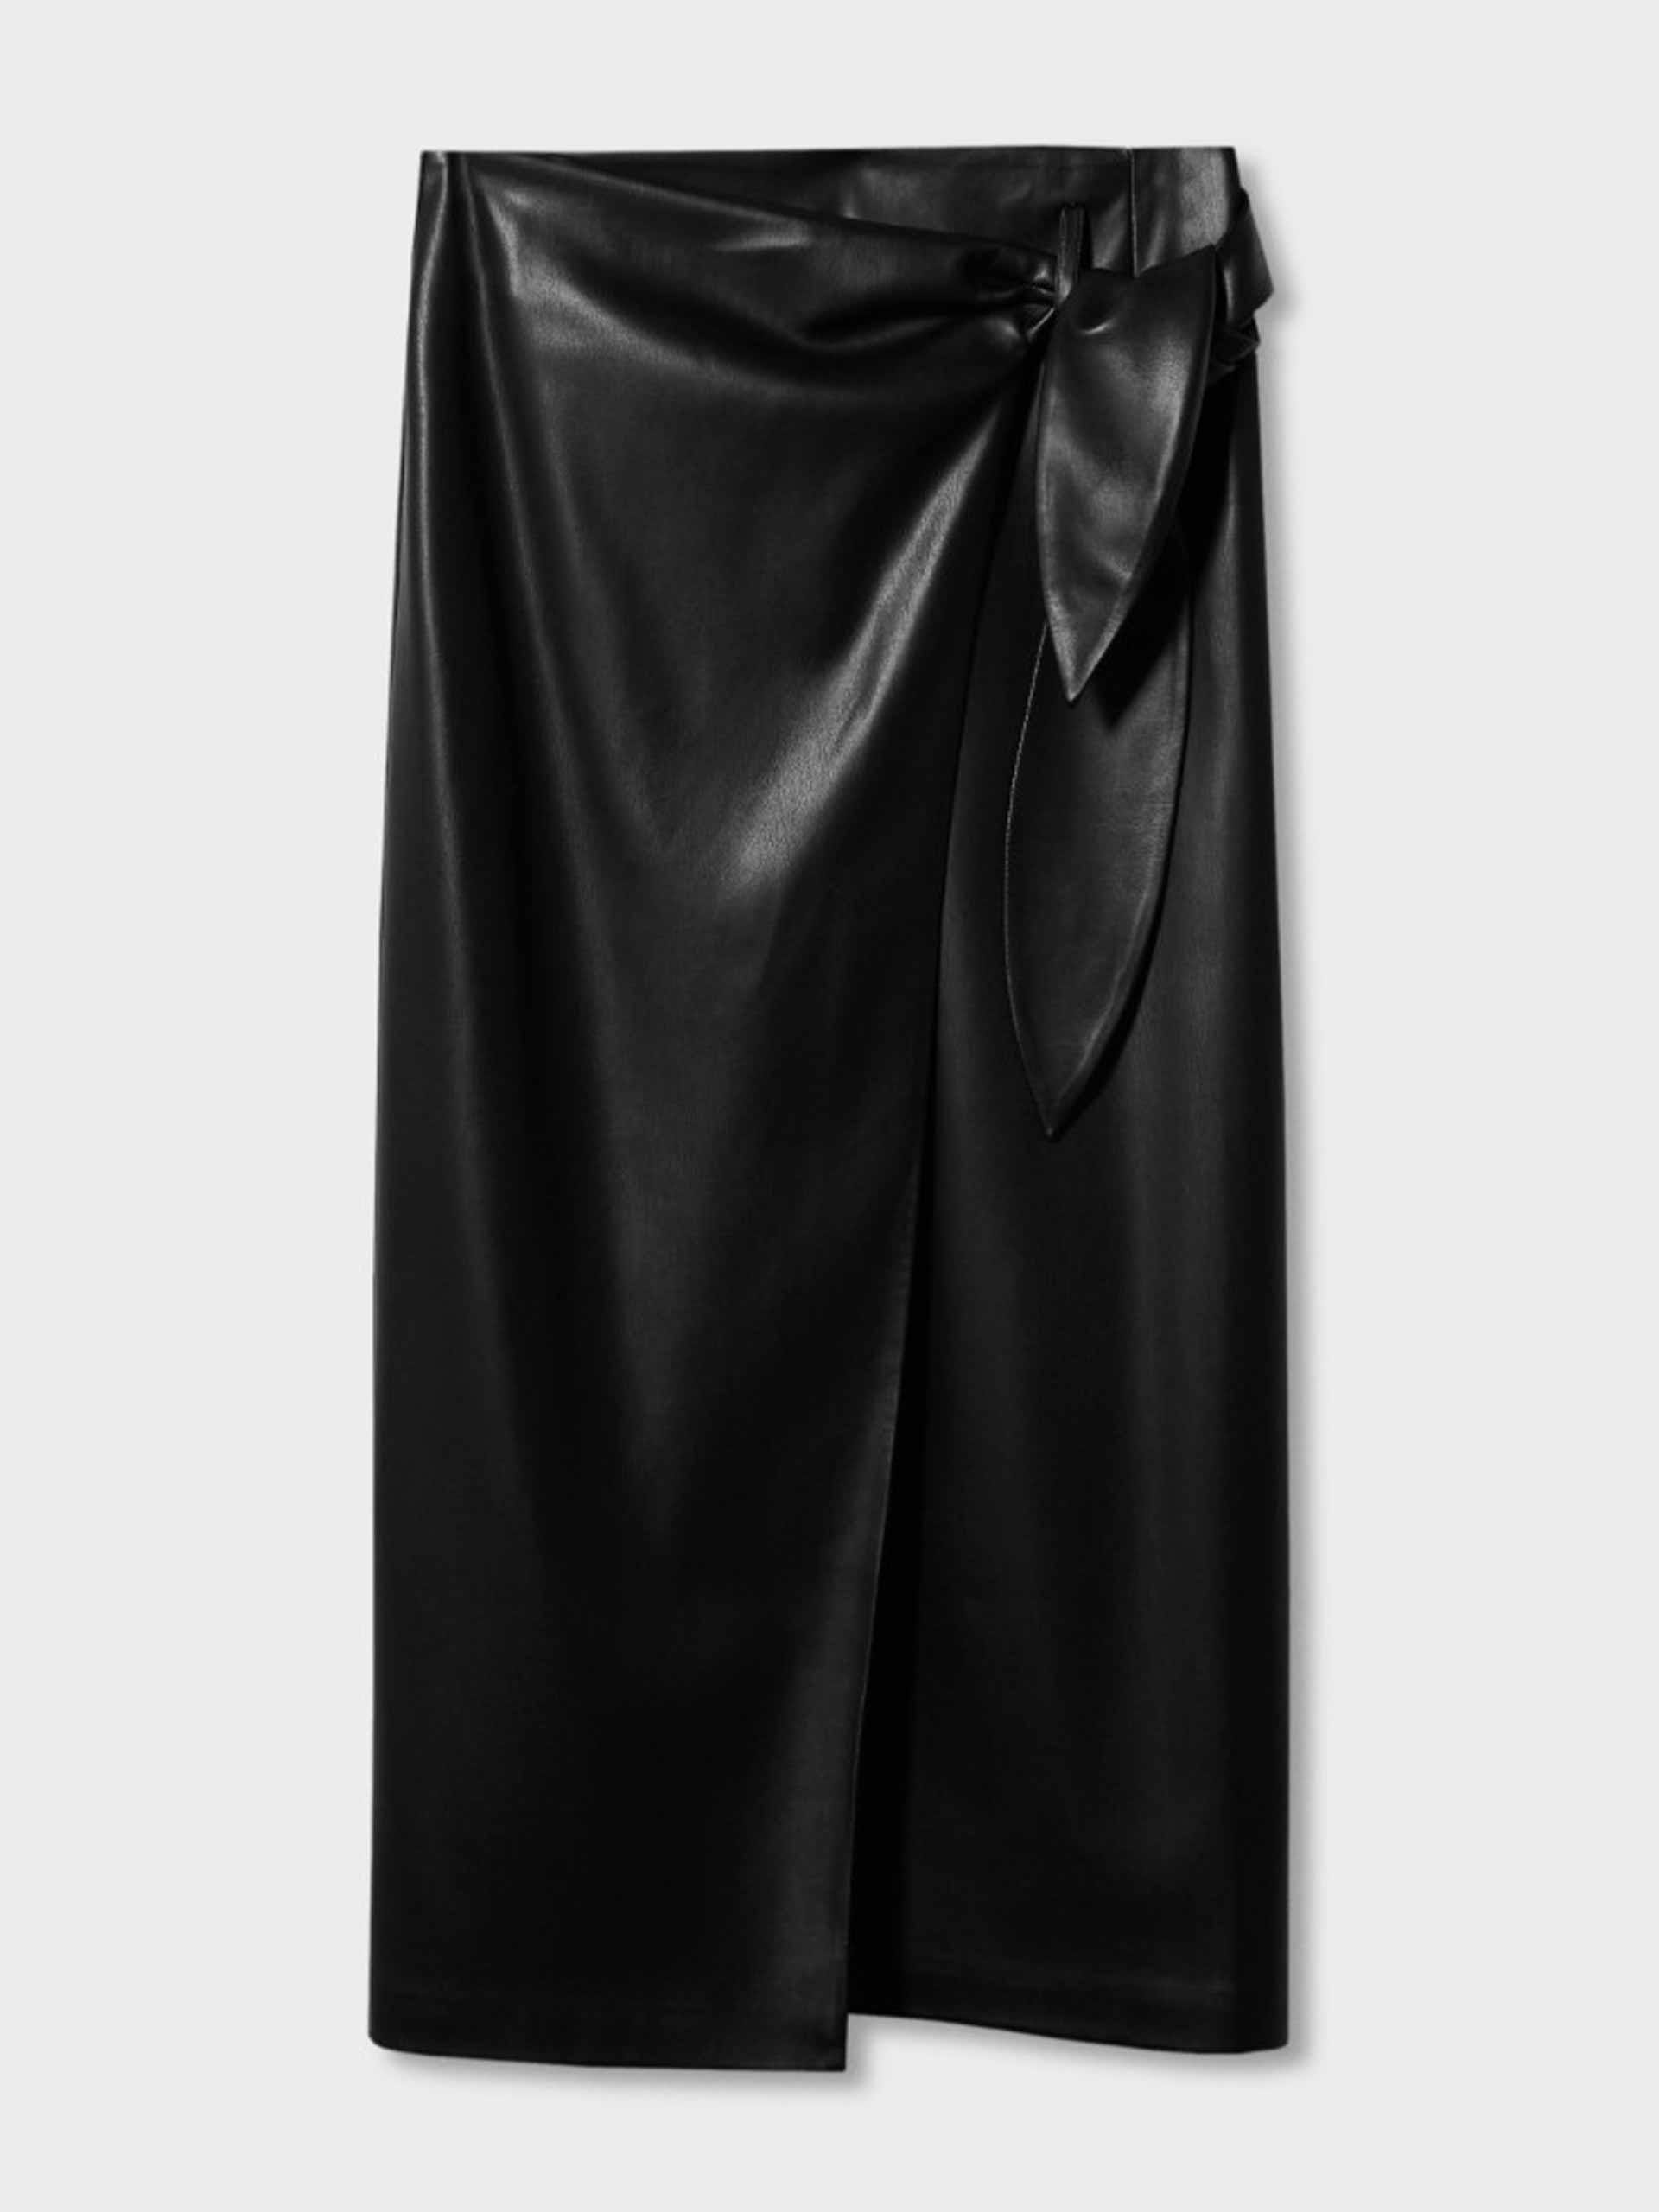 Black faux-leather skirt